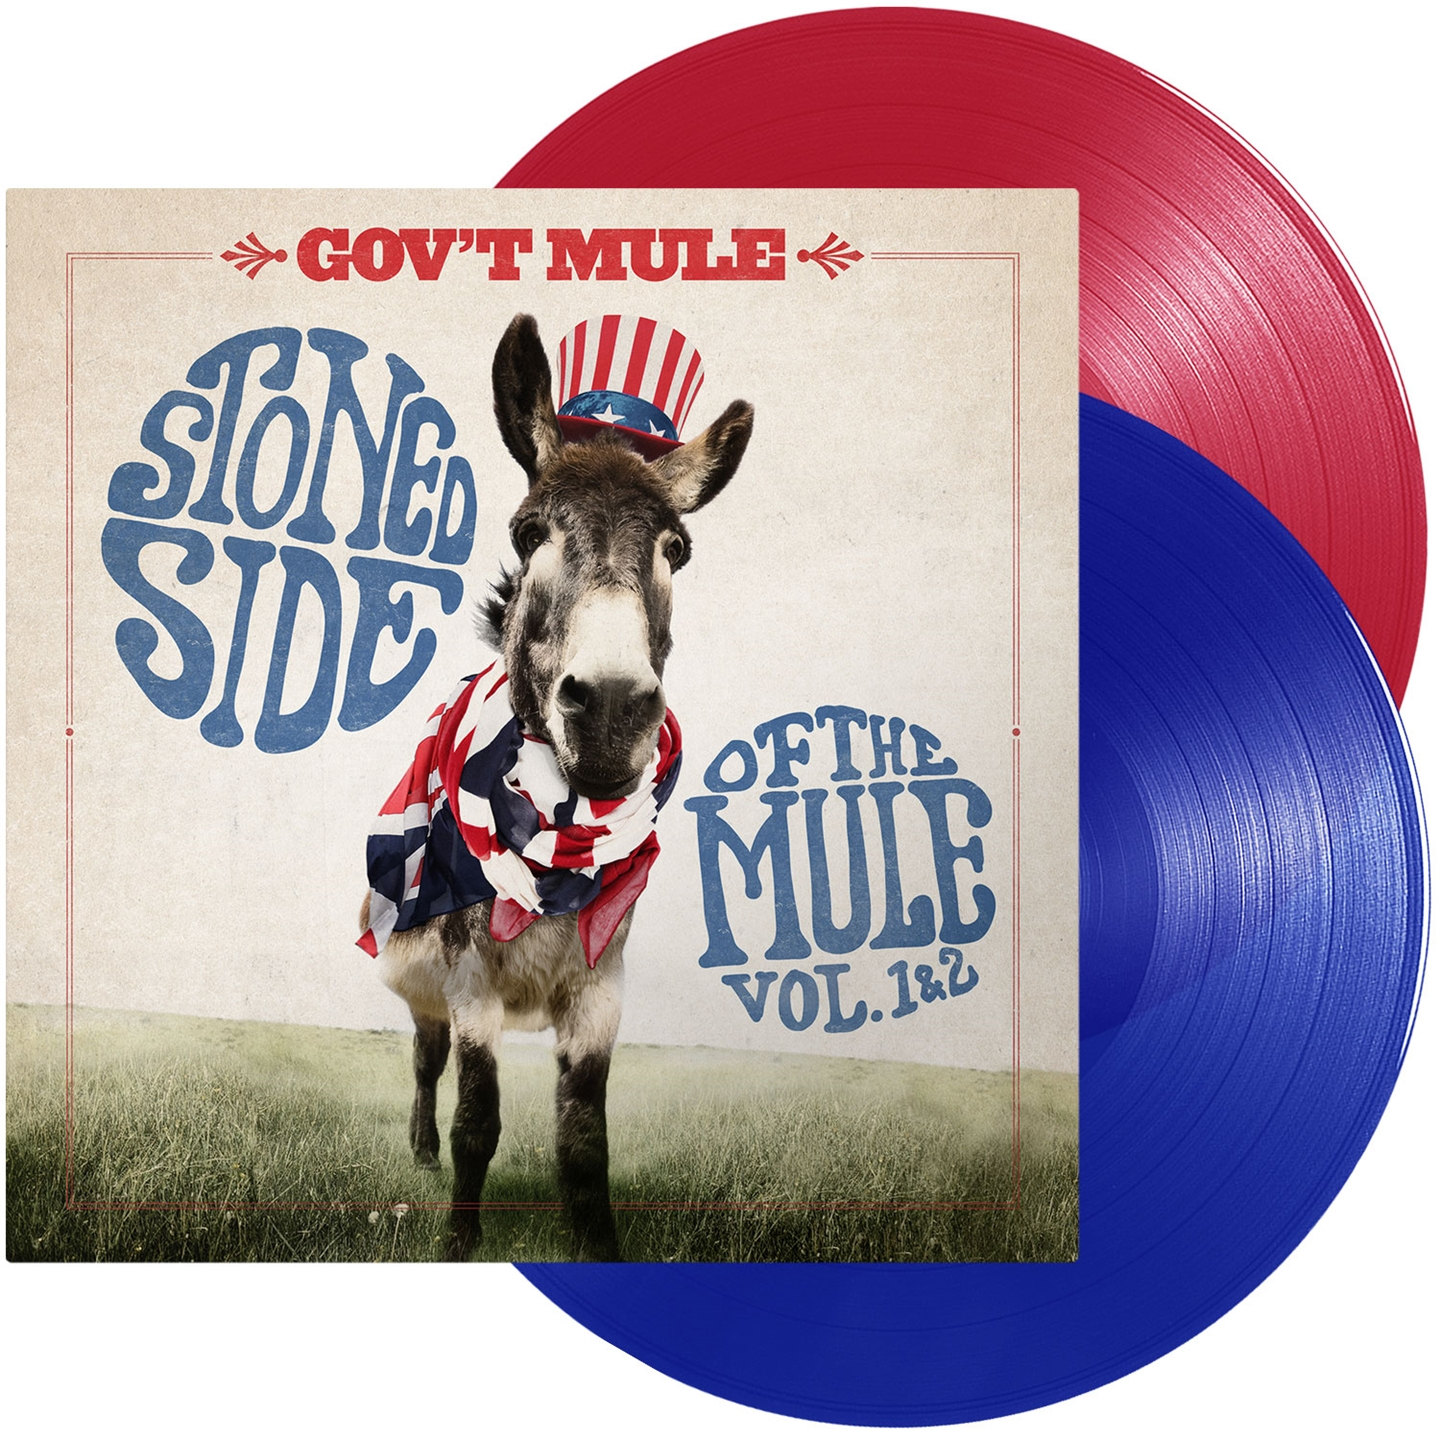 STONED SIDE OF THE MULE [2 LPS RE-ISSUE ON TRANSPARENT RED AND BLUE VINYLS]